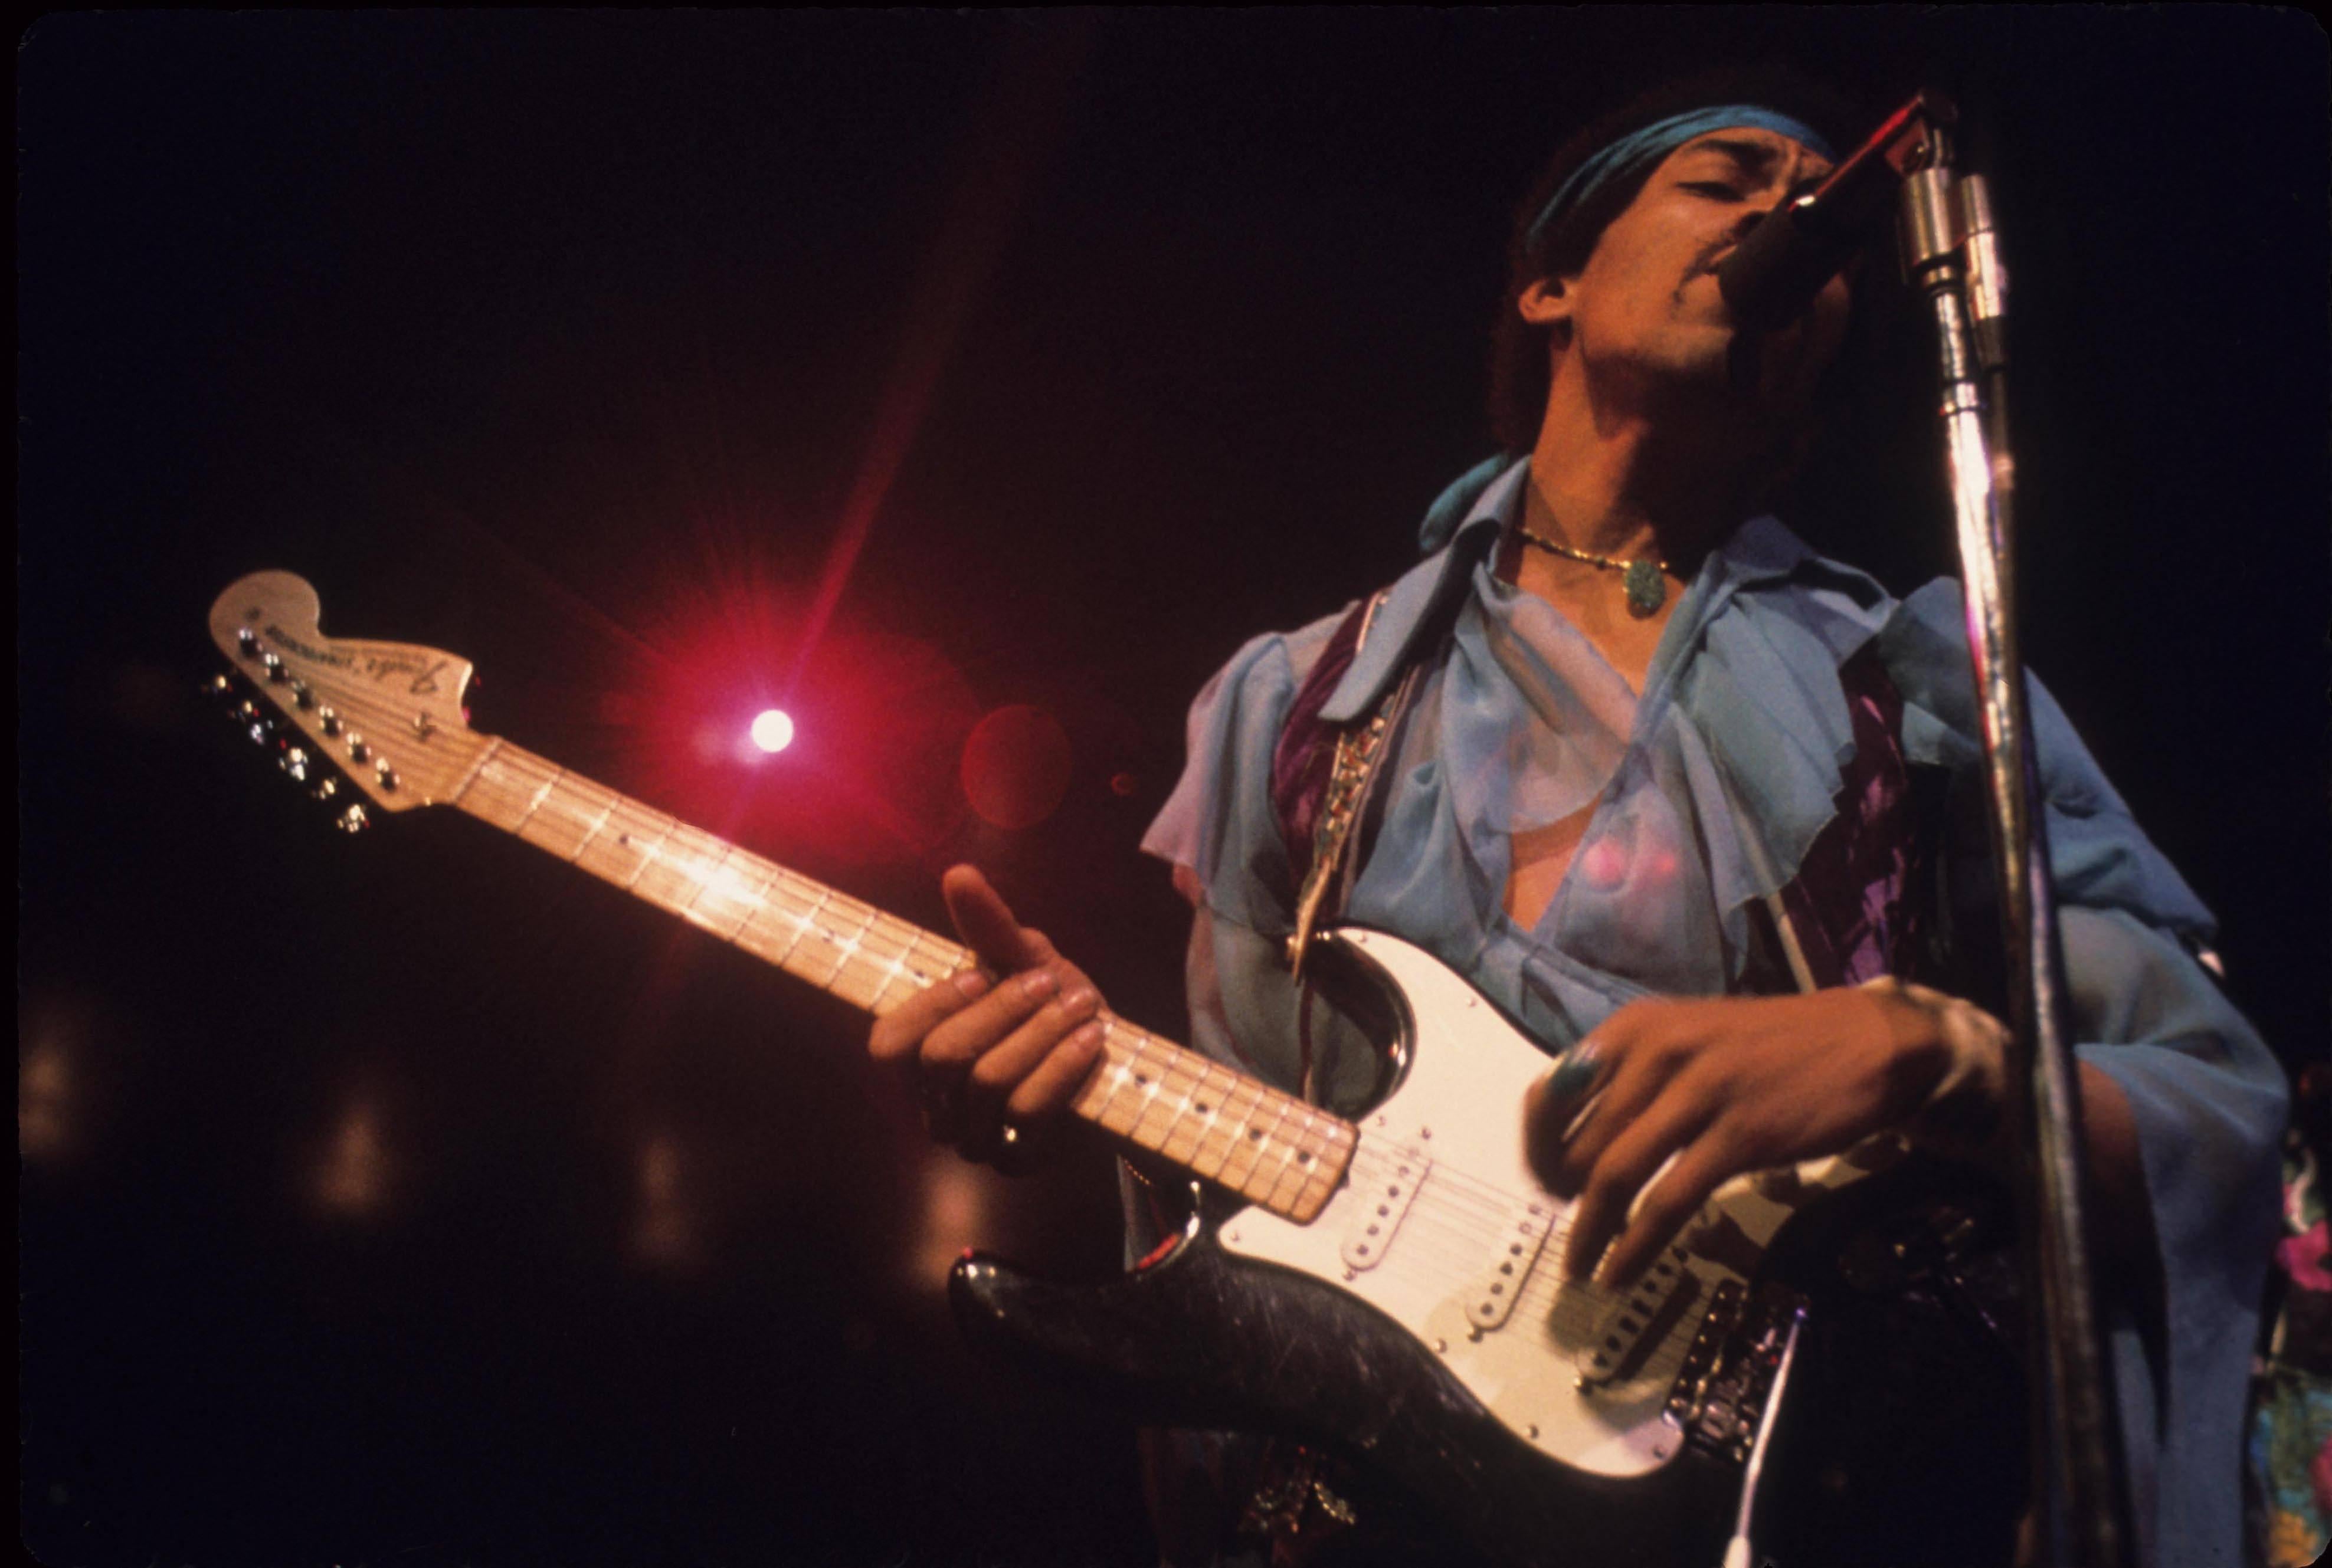 Walter Iooss Color Photograph - Jimi Hendrix on Stage in Blue Fine Art Print